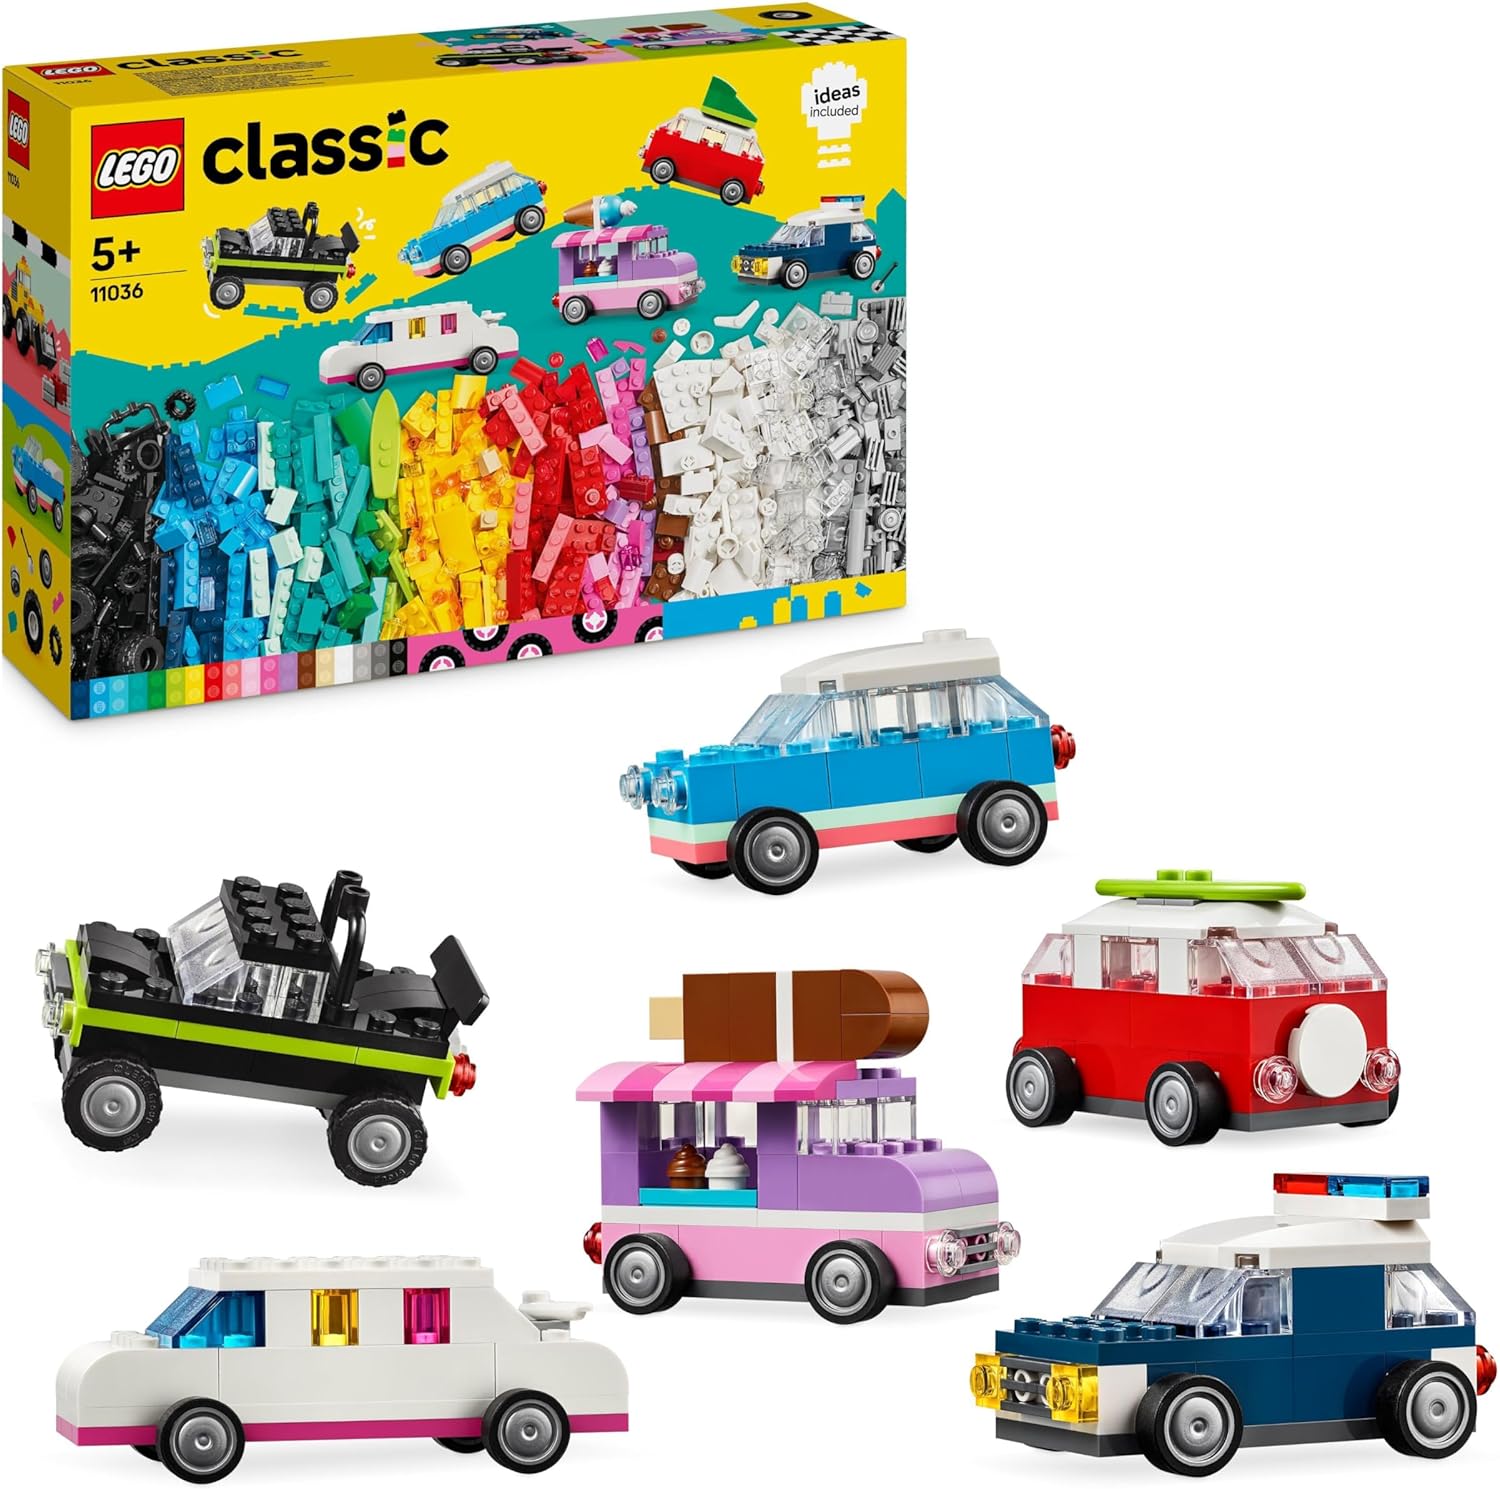 LEGO Classic Creative Vehicles, Building Blocks Set for Colourful Model Cars Including Truck, Police Car and Construction Vehicles, Buildable Toy Cars for Children, Gift for Boys and Girls from 5